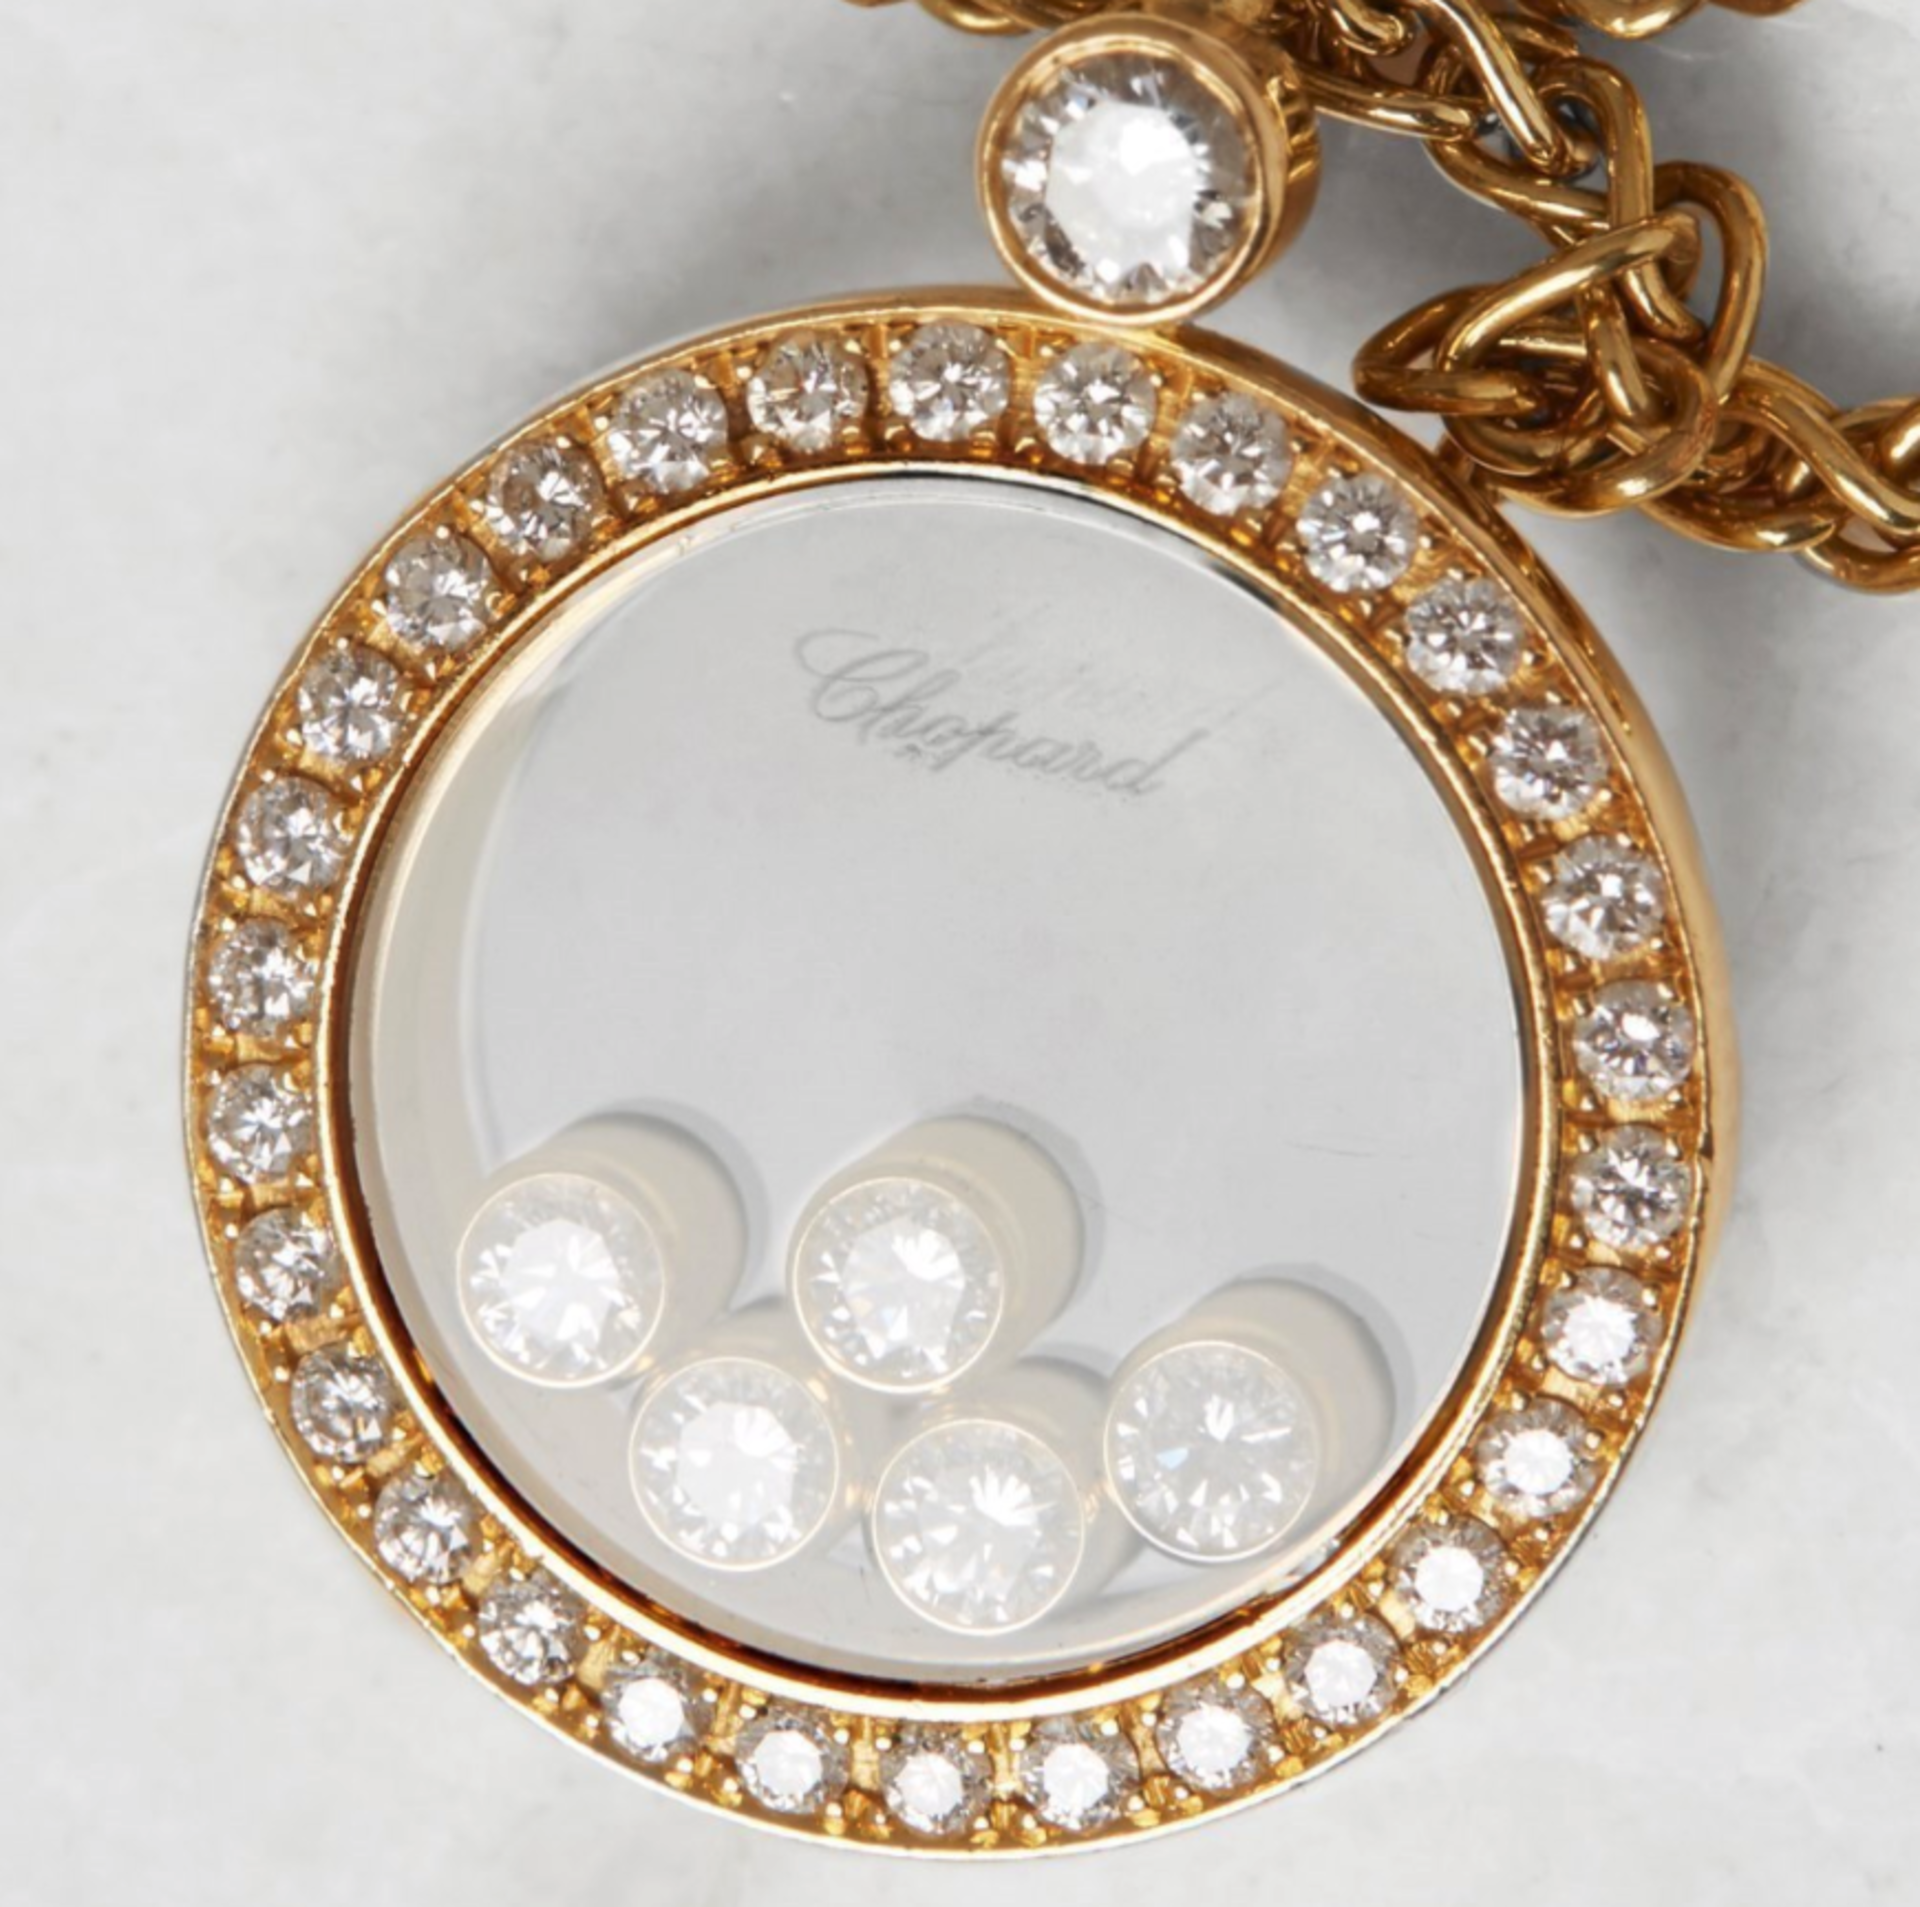 Chopard 18k Yellow Gold Happy Diamonds Necklace - Image 5 of 9